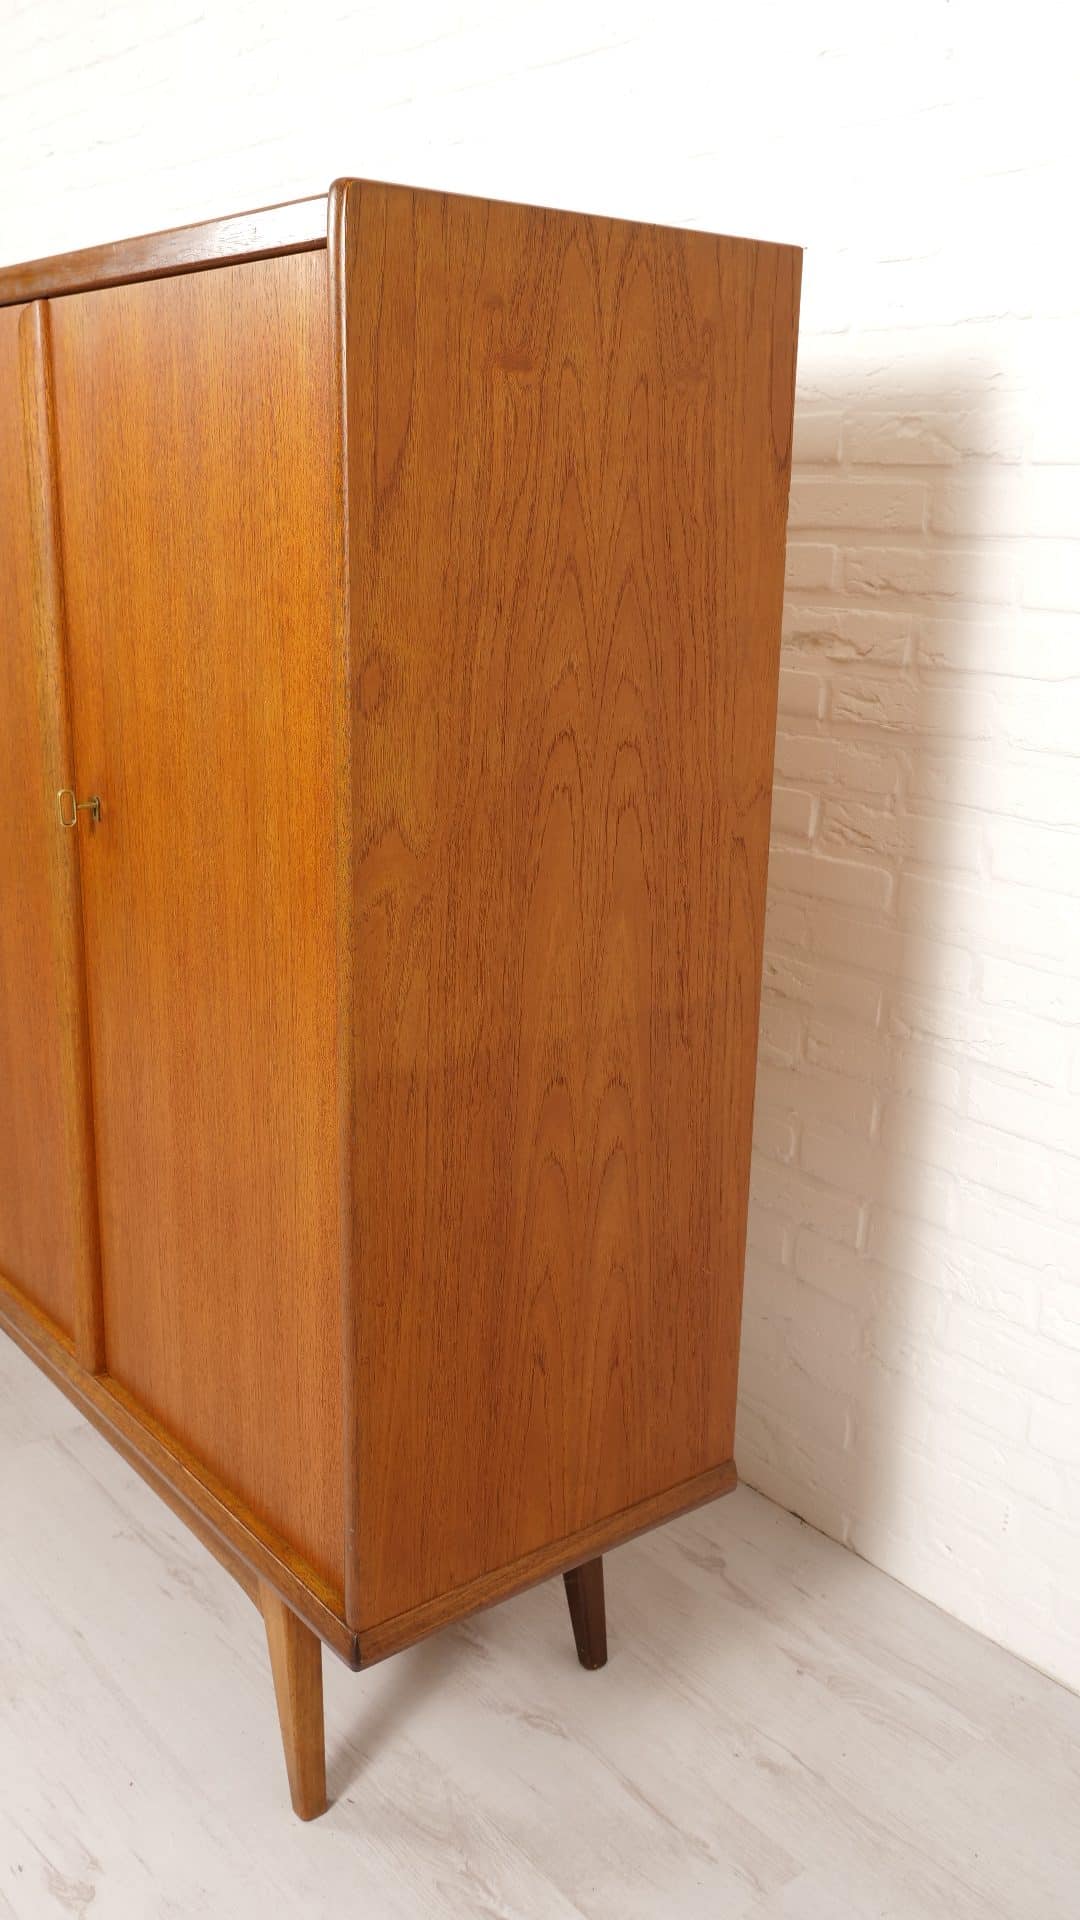 Trp Post Container Data Trp Post Id 8489 Highboard Serving Cupboard Teak 1960s Trp Post Container